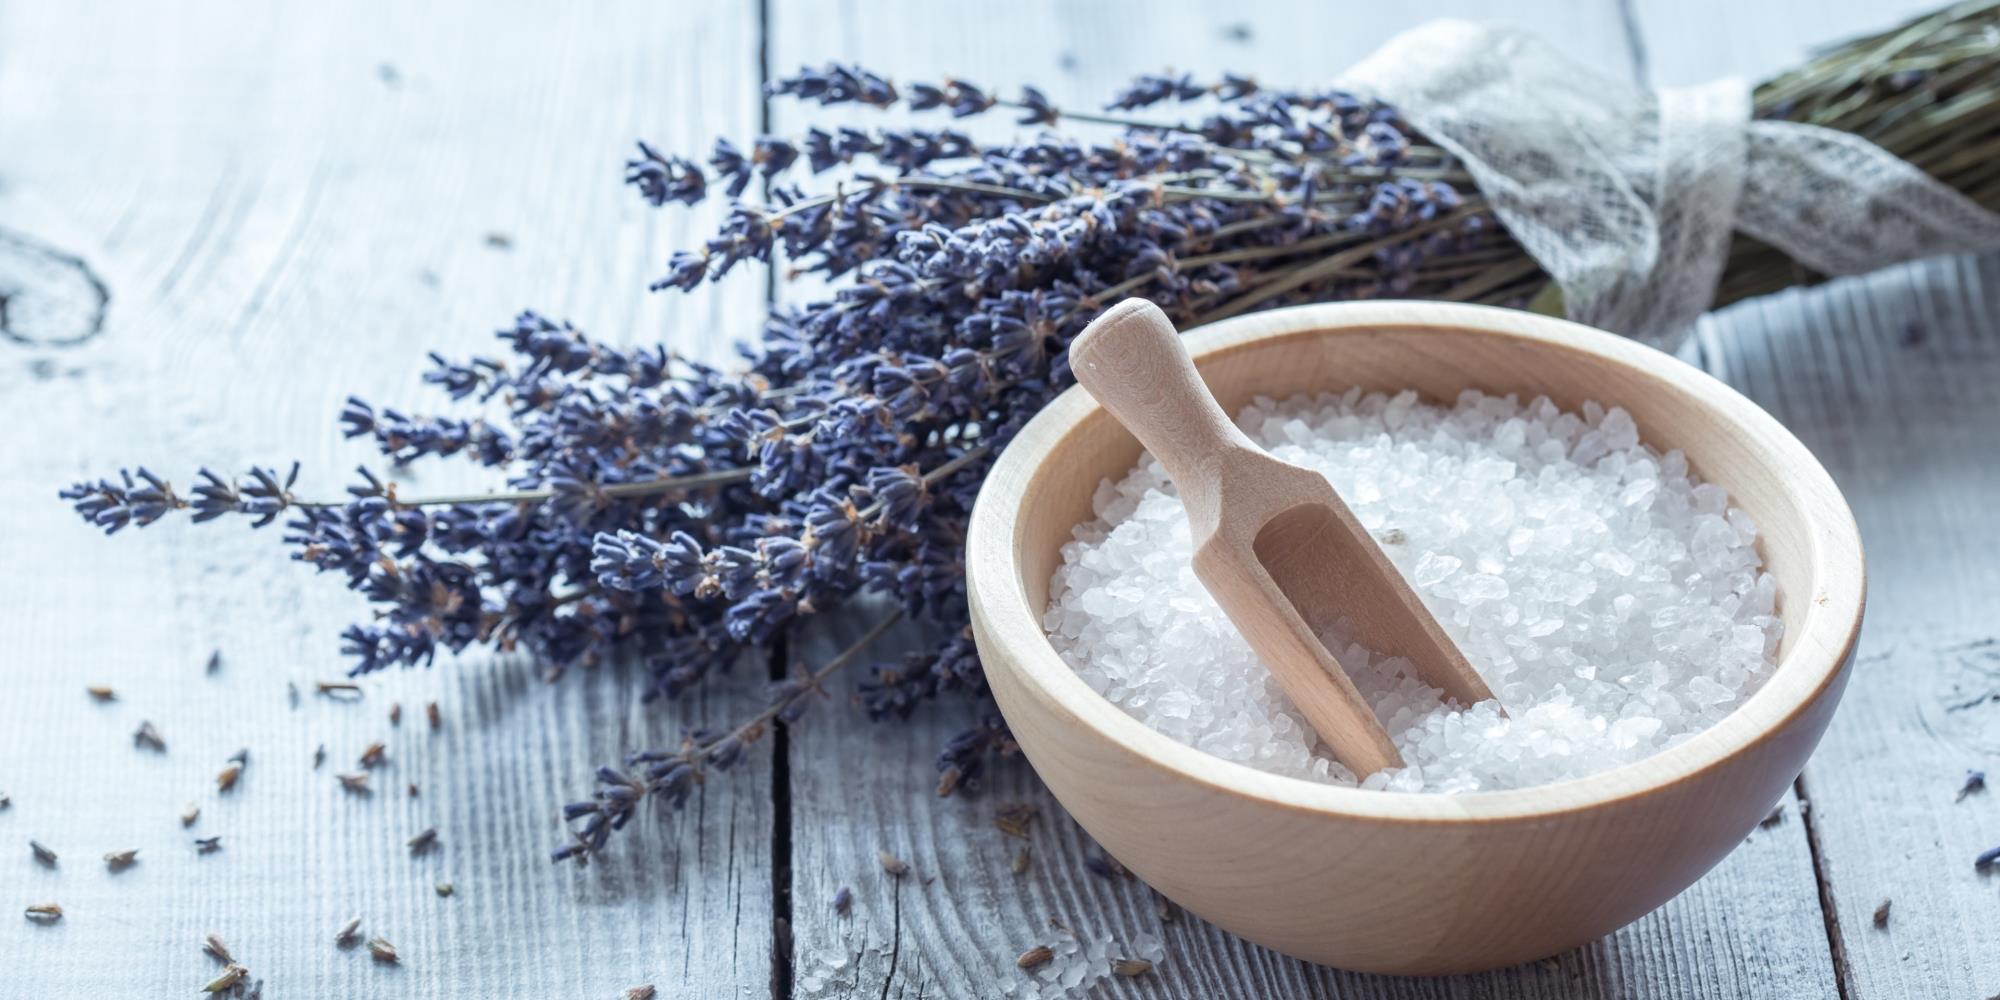 Lavender - The Calming Herb